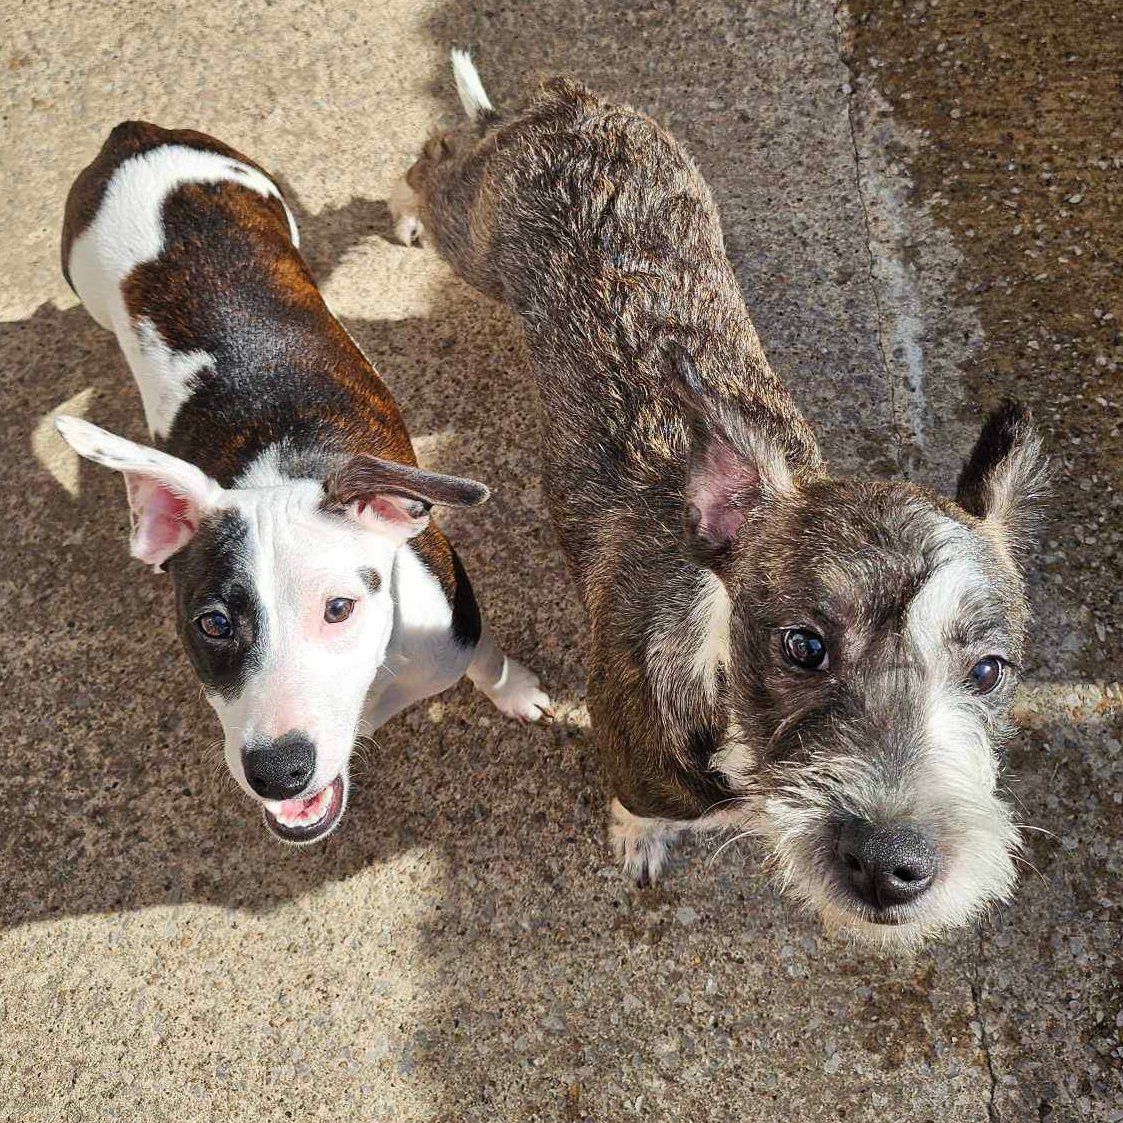 Please retweet to help find this unnamed bonded piar find a home together #SHEFFIELD #YORKSHIRE #UK BONDED PAIR AVAILABLE FOR ADOPTION FROM A COUNCIL POUND✅Terrier sisters, sadly now in a council pound after being thrown out of a car Please share to help find them a wonderful